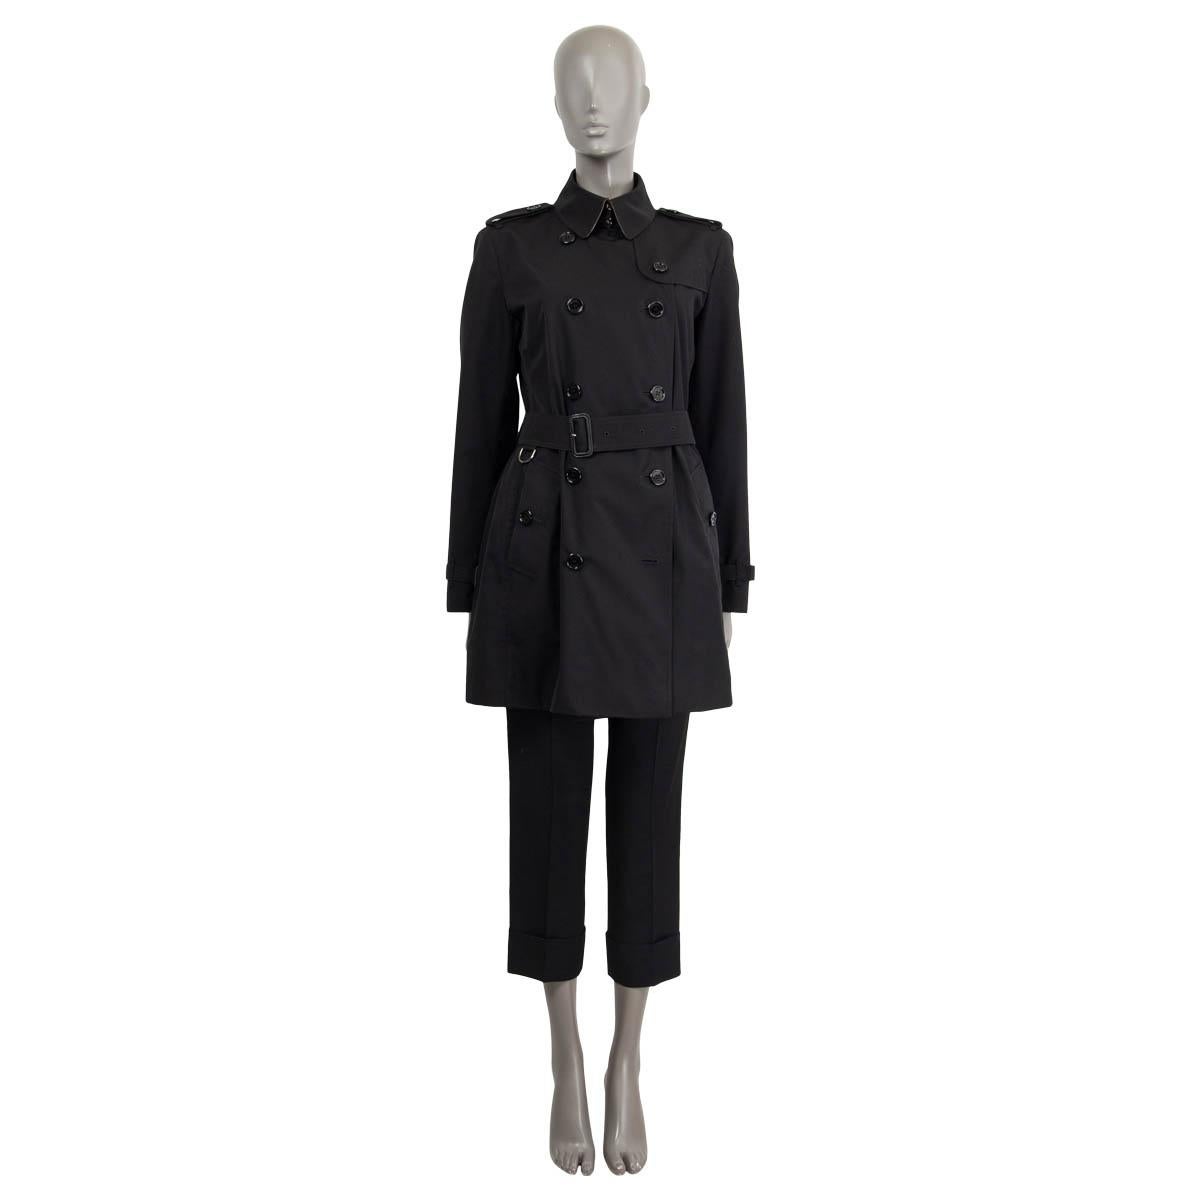 100% authentic Burberry Kensington short trench coat in black polyester (55%) and cotton (35%). Features black belts on the cuffs. Closes with buttons on the front and it has two pockets with buttons on the side. Lined in cotton (50%) and polyester